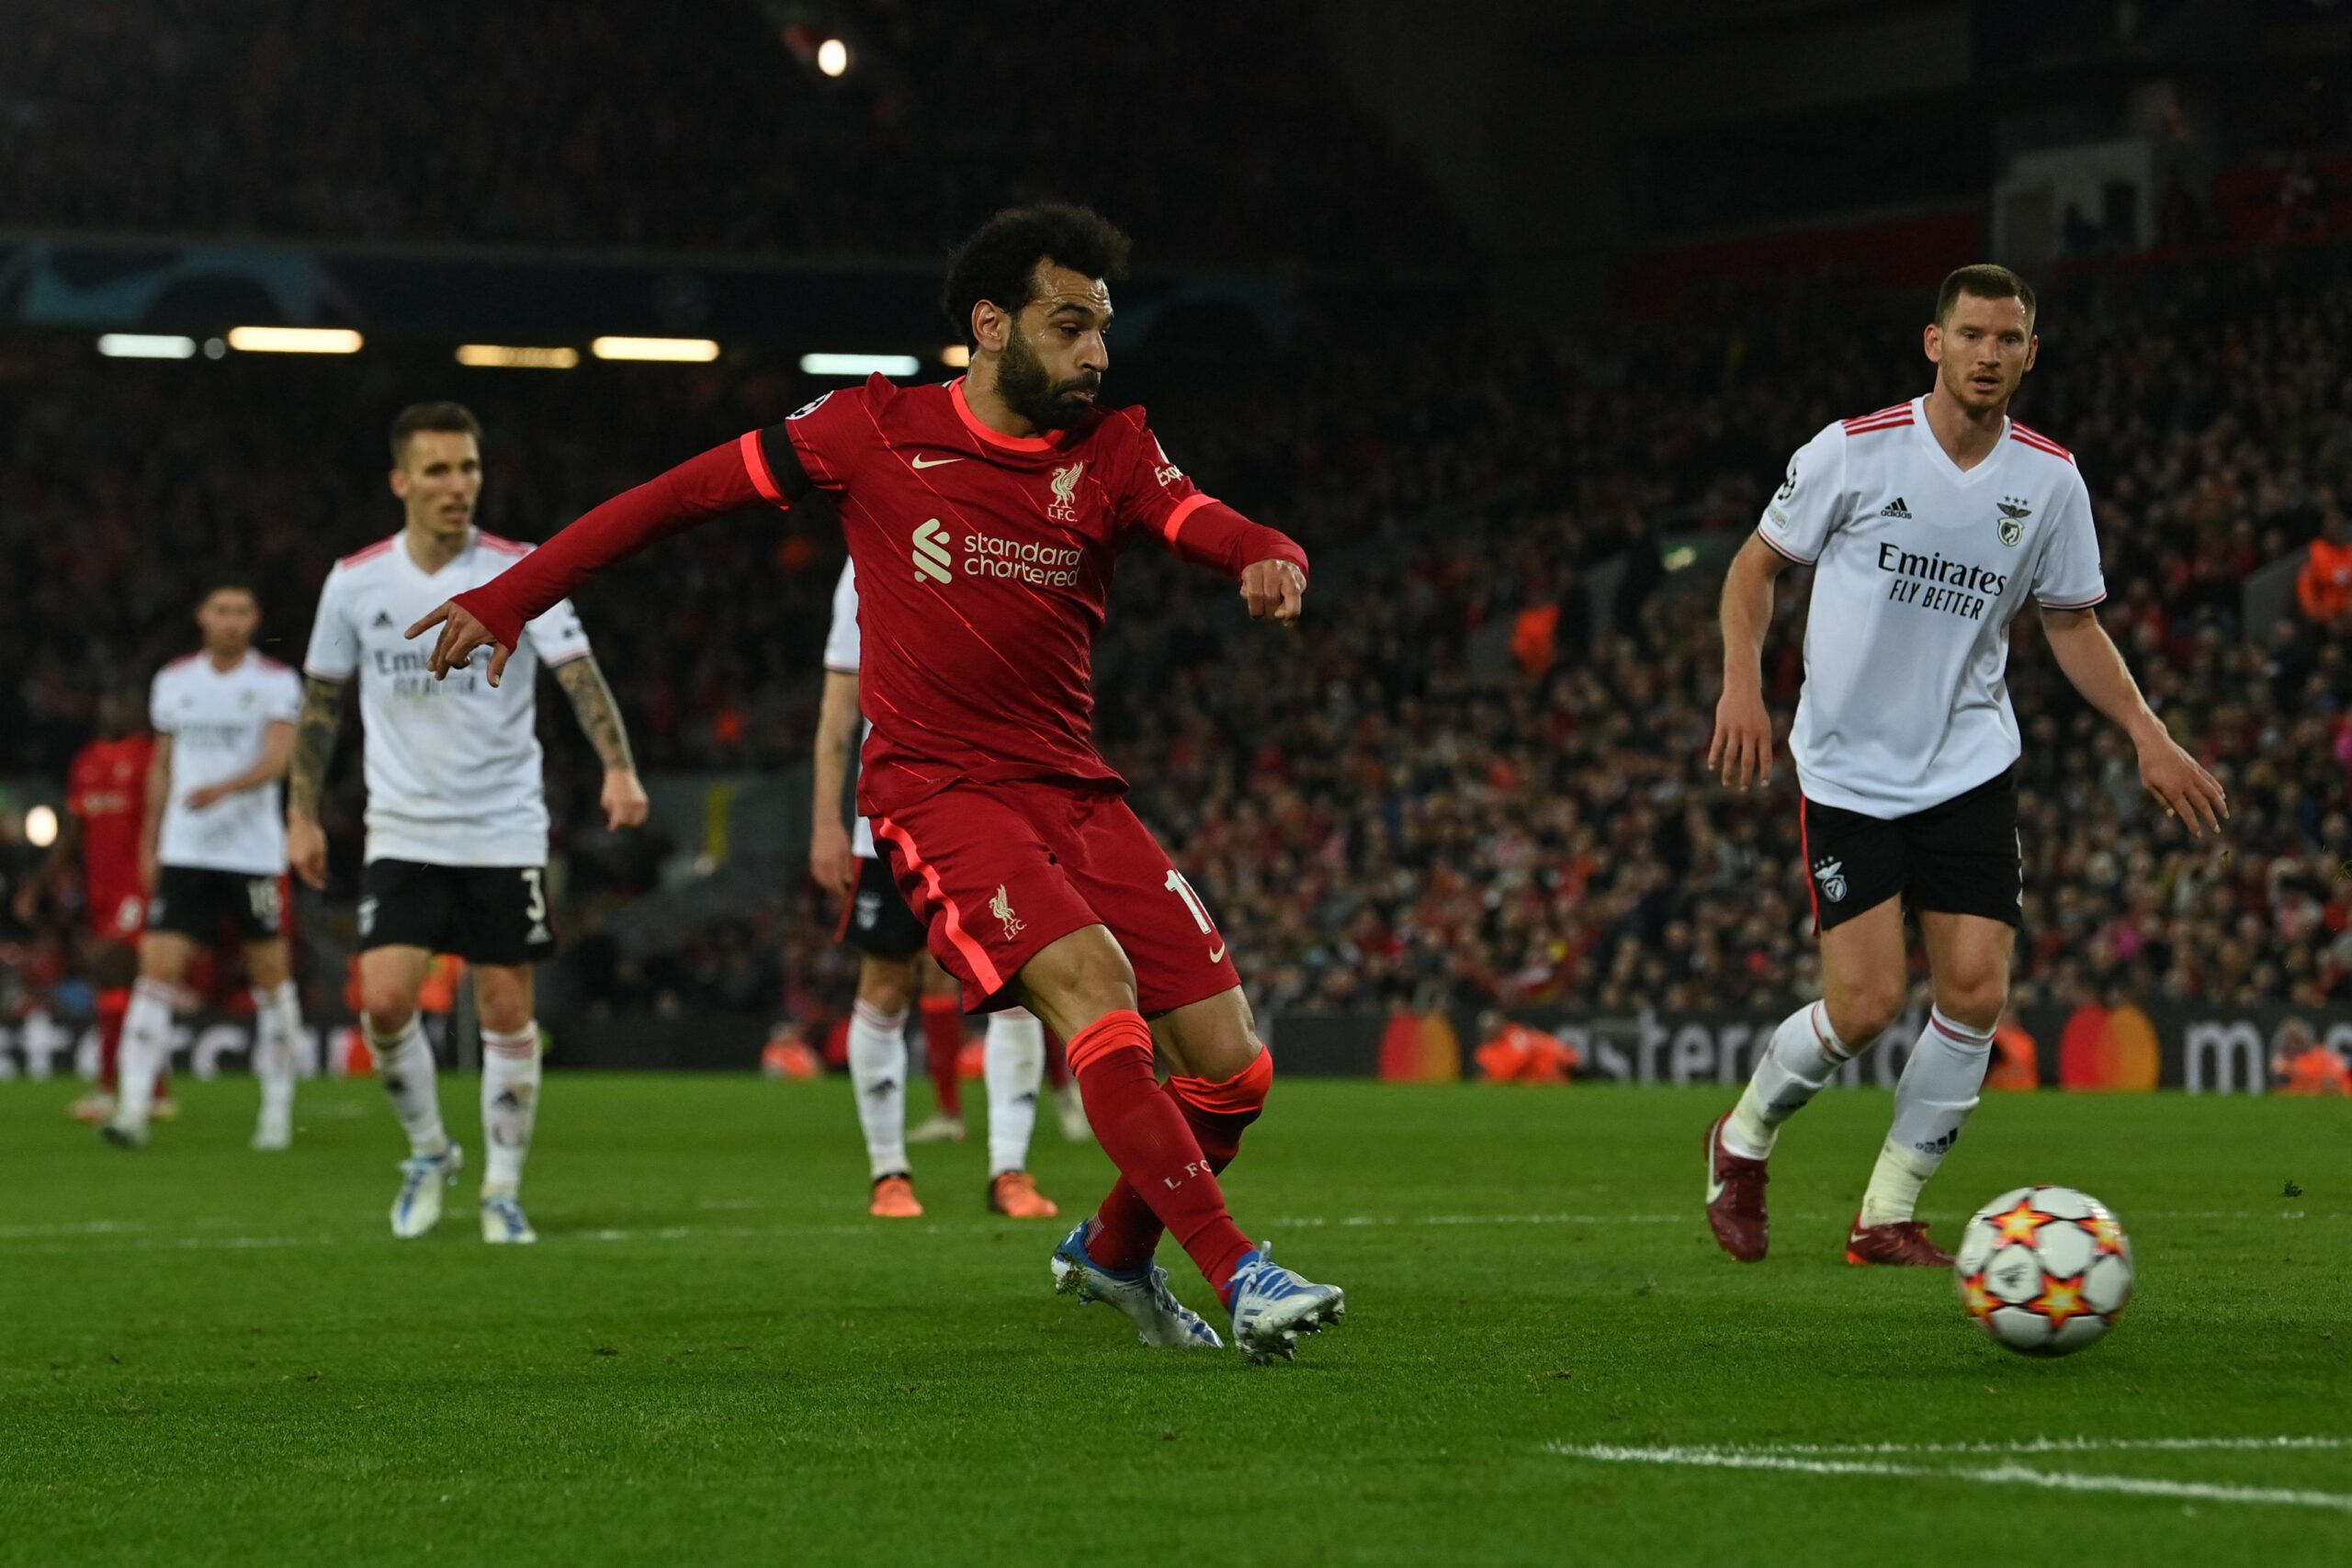 Liverpool's Egyptian midfielder Mohamed Salah shoots but he is offside during the UEFA Champions League quarter final second leg football match between Liverpool and Benfica at the Anfield stadium, in Liverpool, on April 13, 2022. (Photo by Paul ELLIS / AFP) (Photo by PAUL ELLIS/AFP via Getty Images)